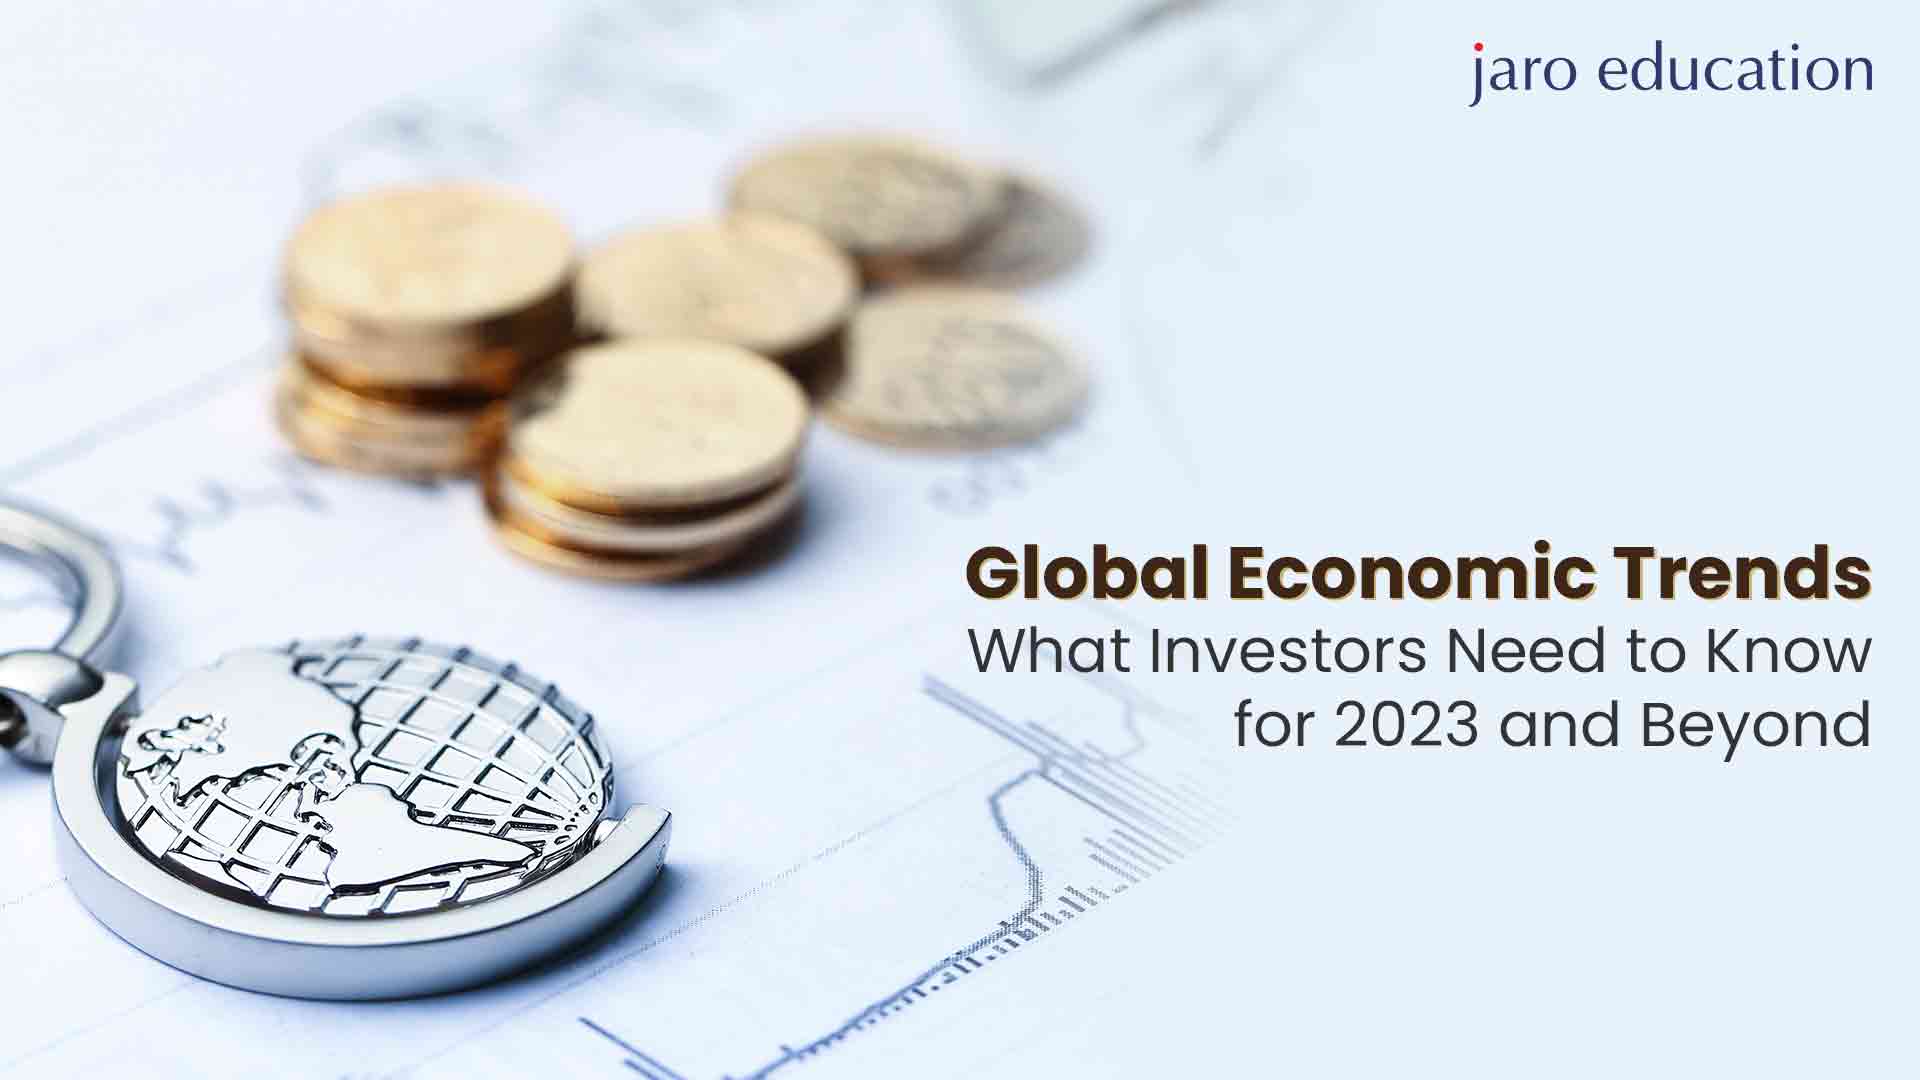 Global Economic Trends What Investors Need to Know for 2023 and Beyond